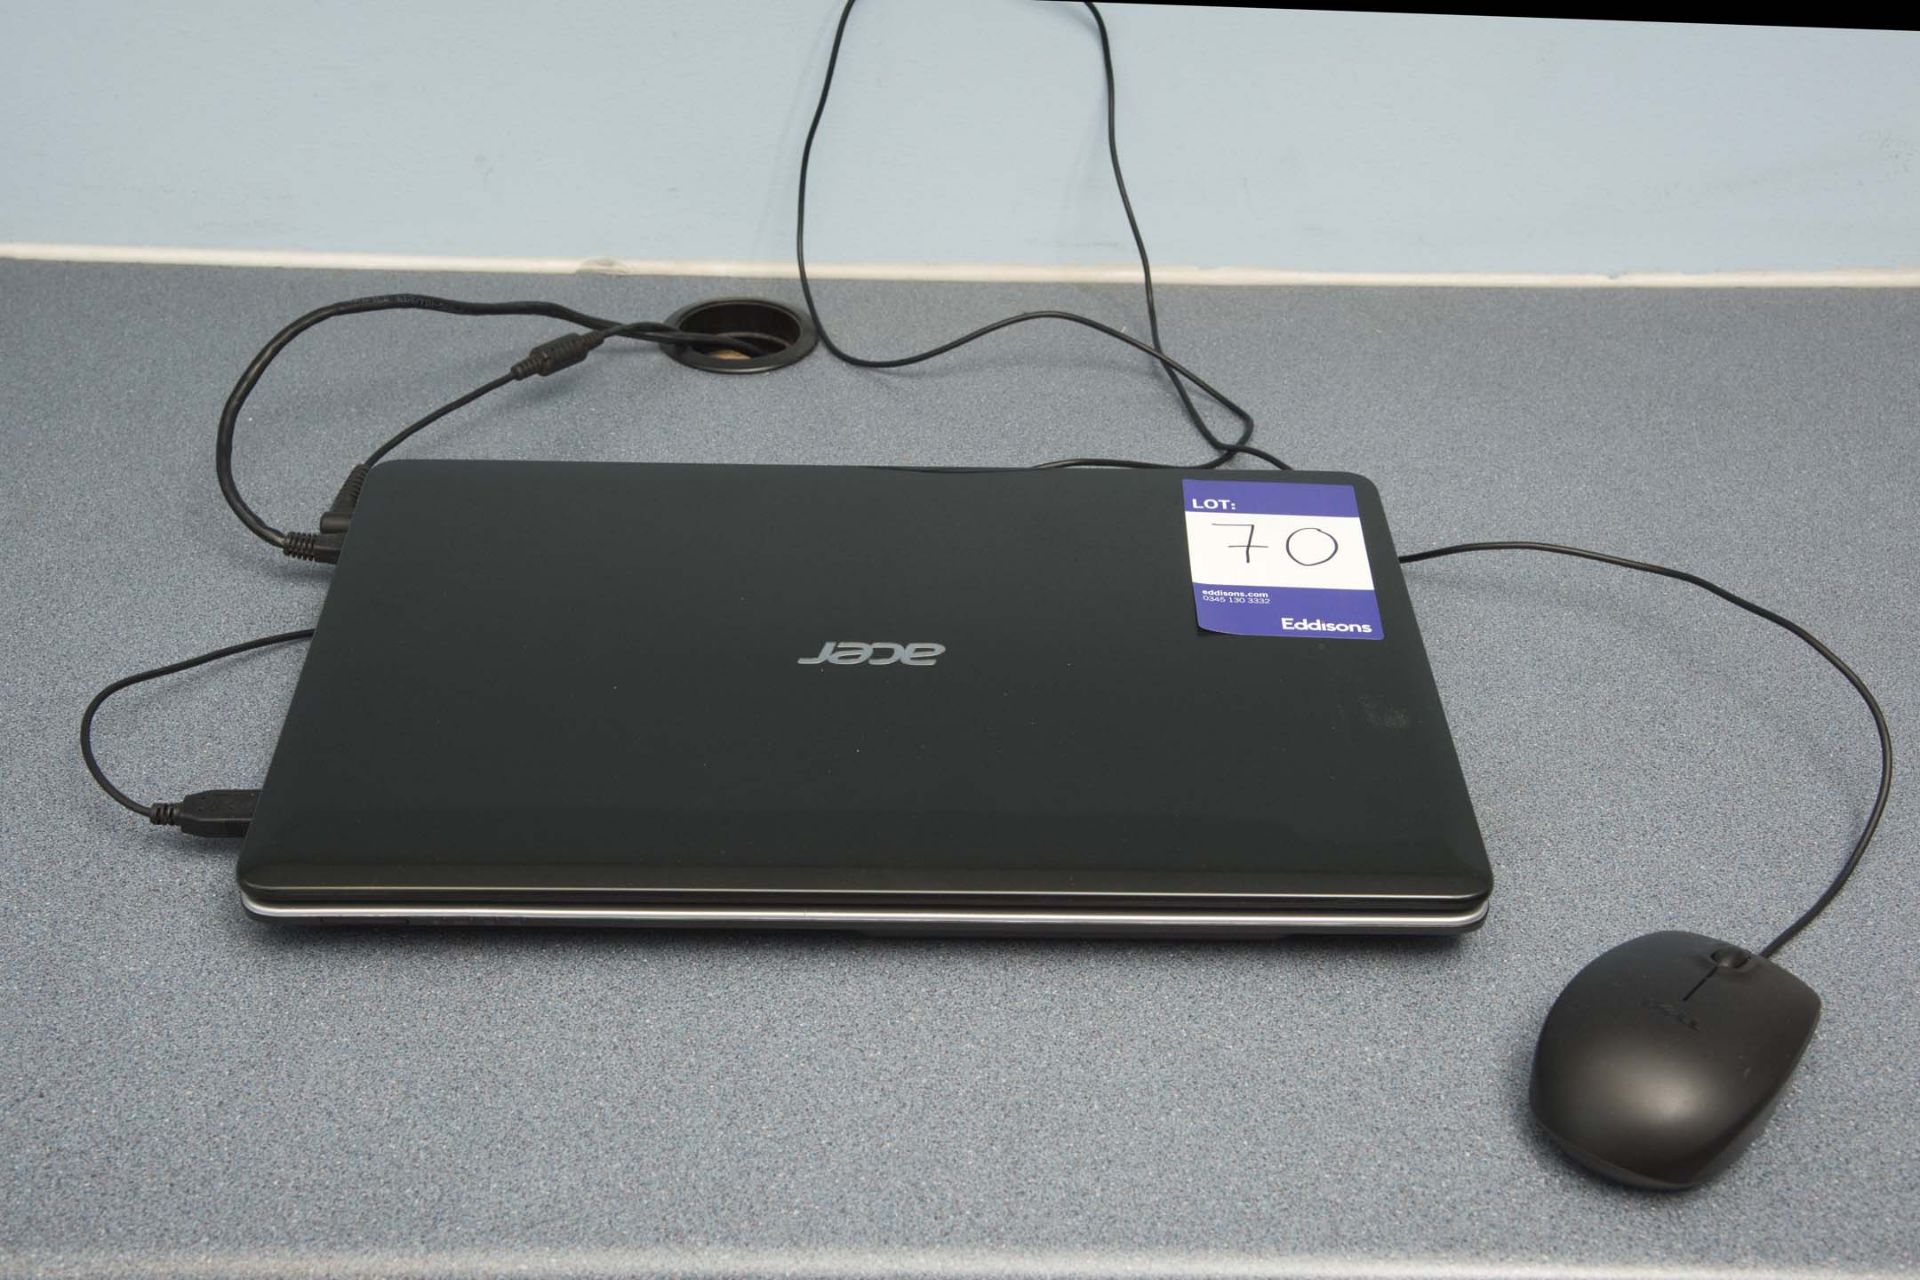 Acer Aspire E1-571 laptop 15.6” Intel Core 3.2 Ghz 4GB Memory 750GB Hard Drive Serial No. - Image 2 of 3